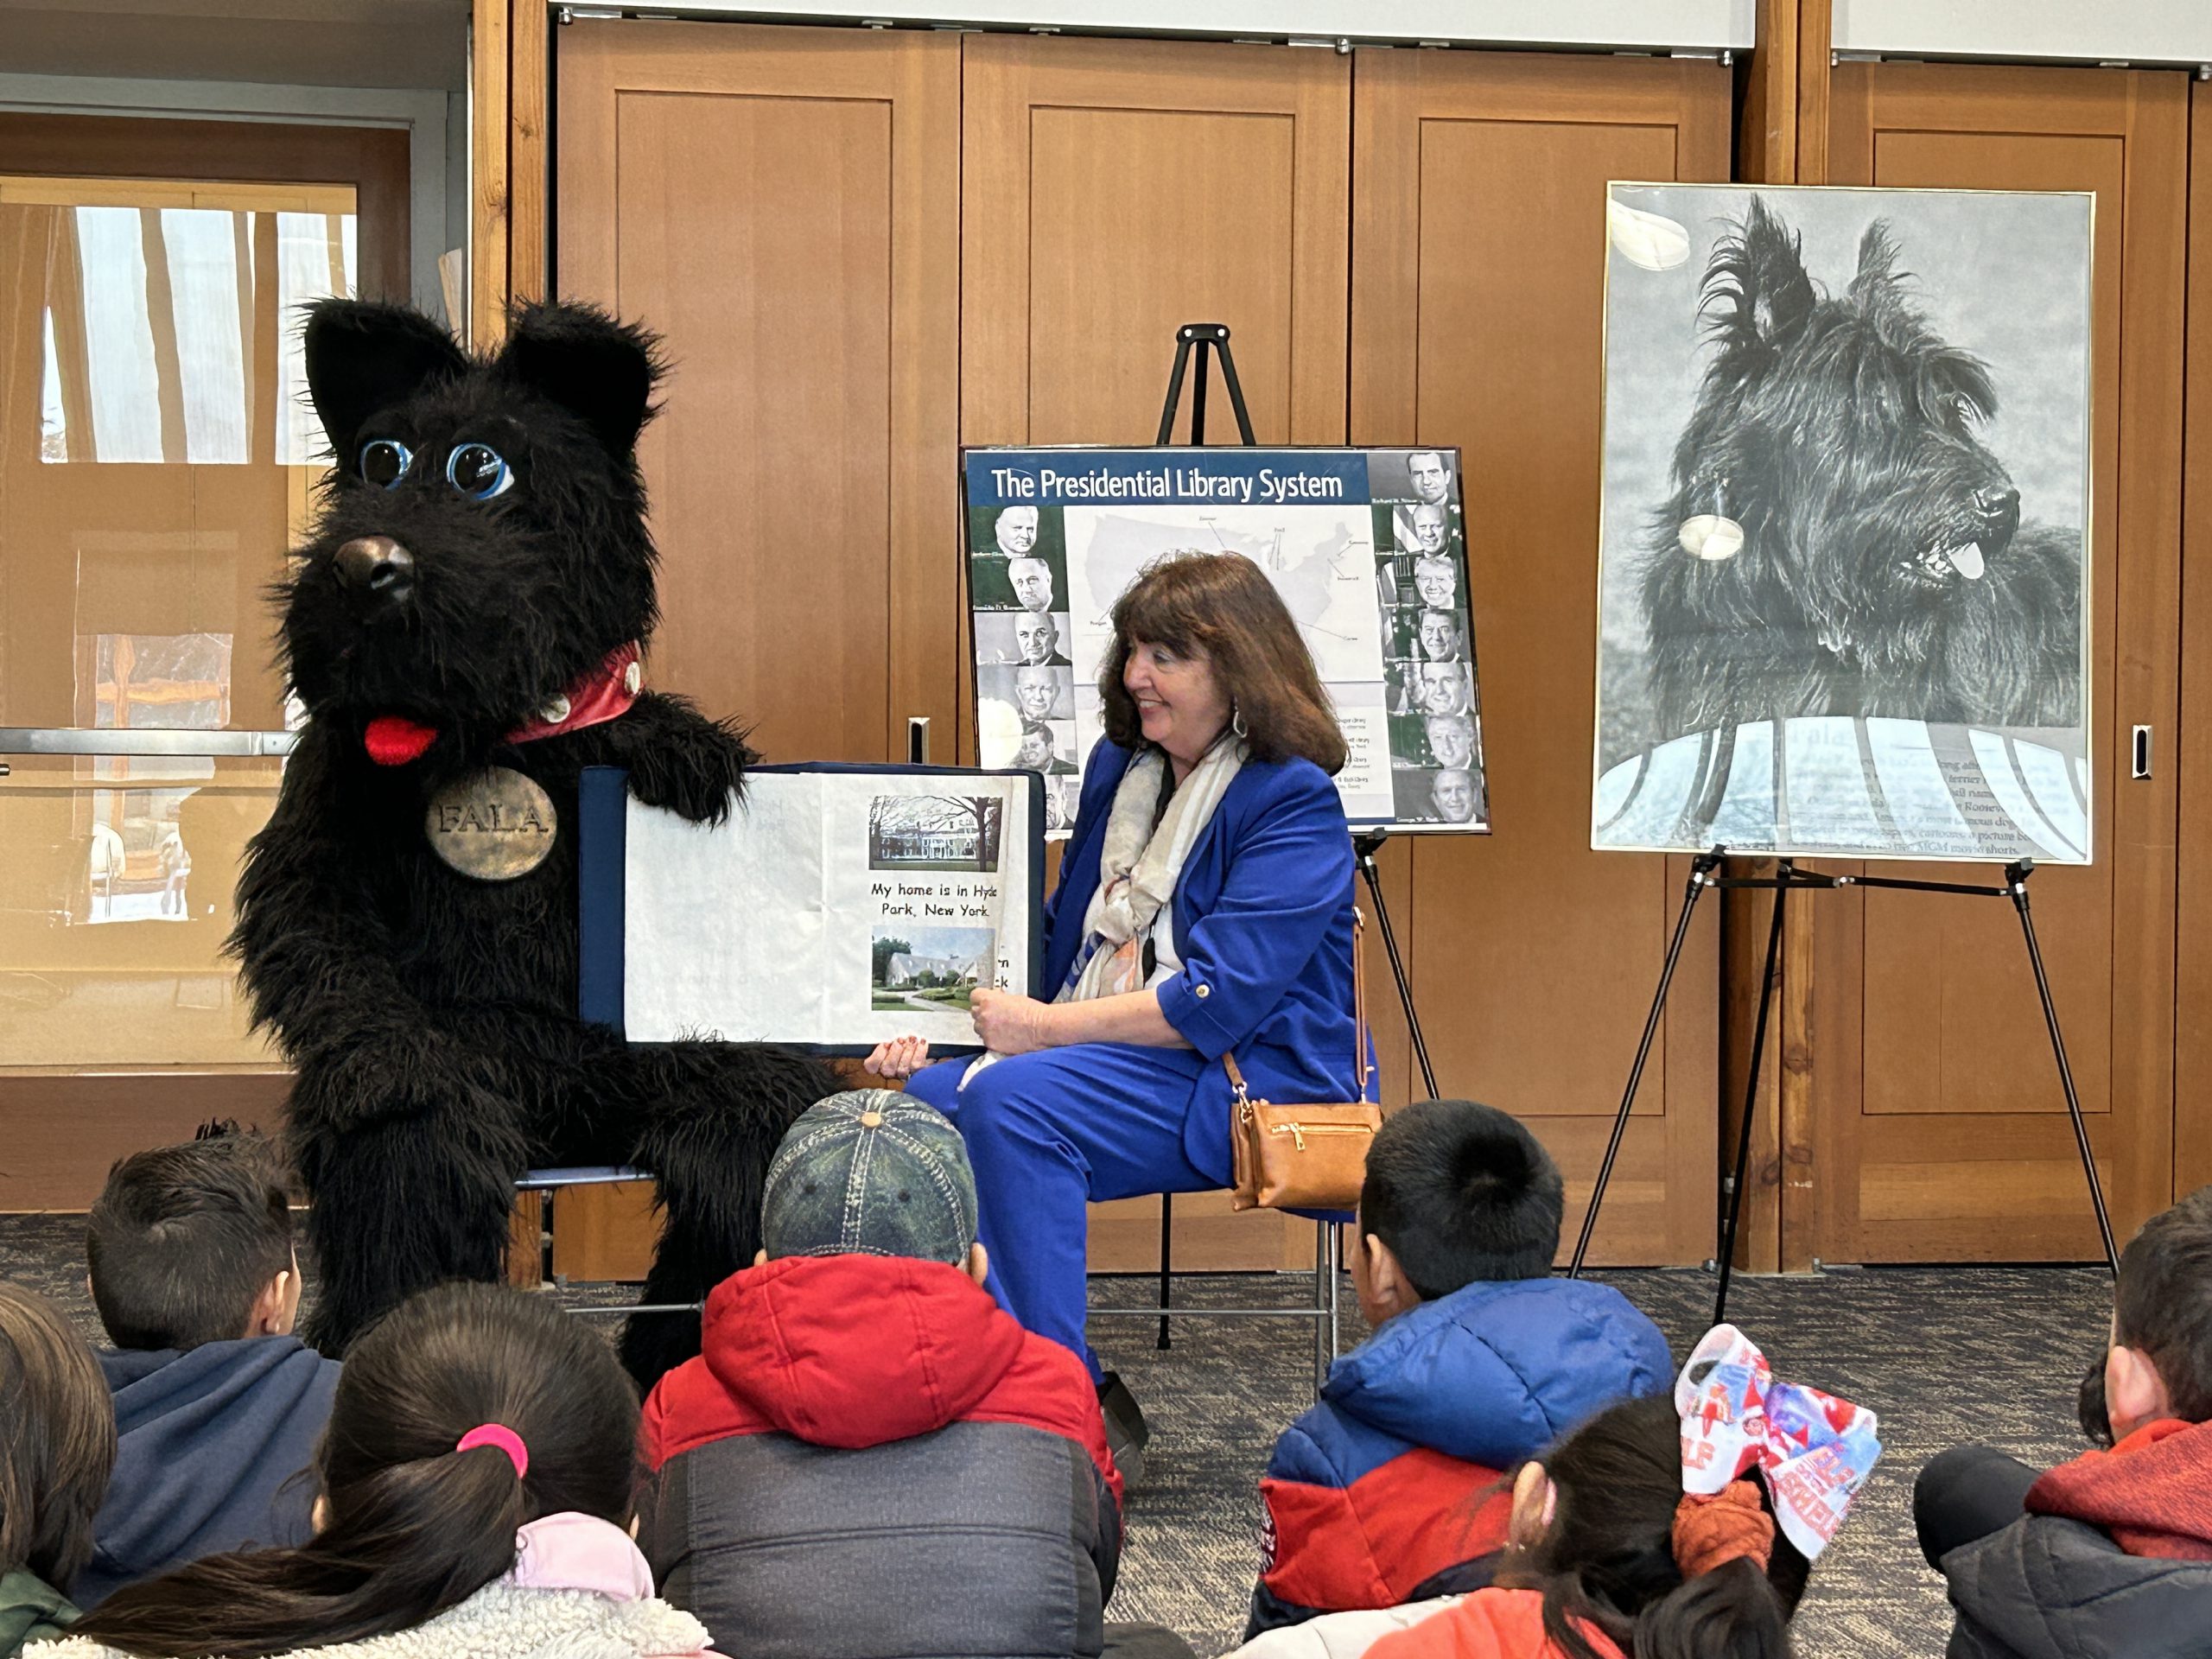 An adult reads from a book next to a person in a black dog costume with a nametag that says "Fala." Intermediate school students look on.